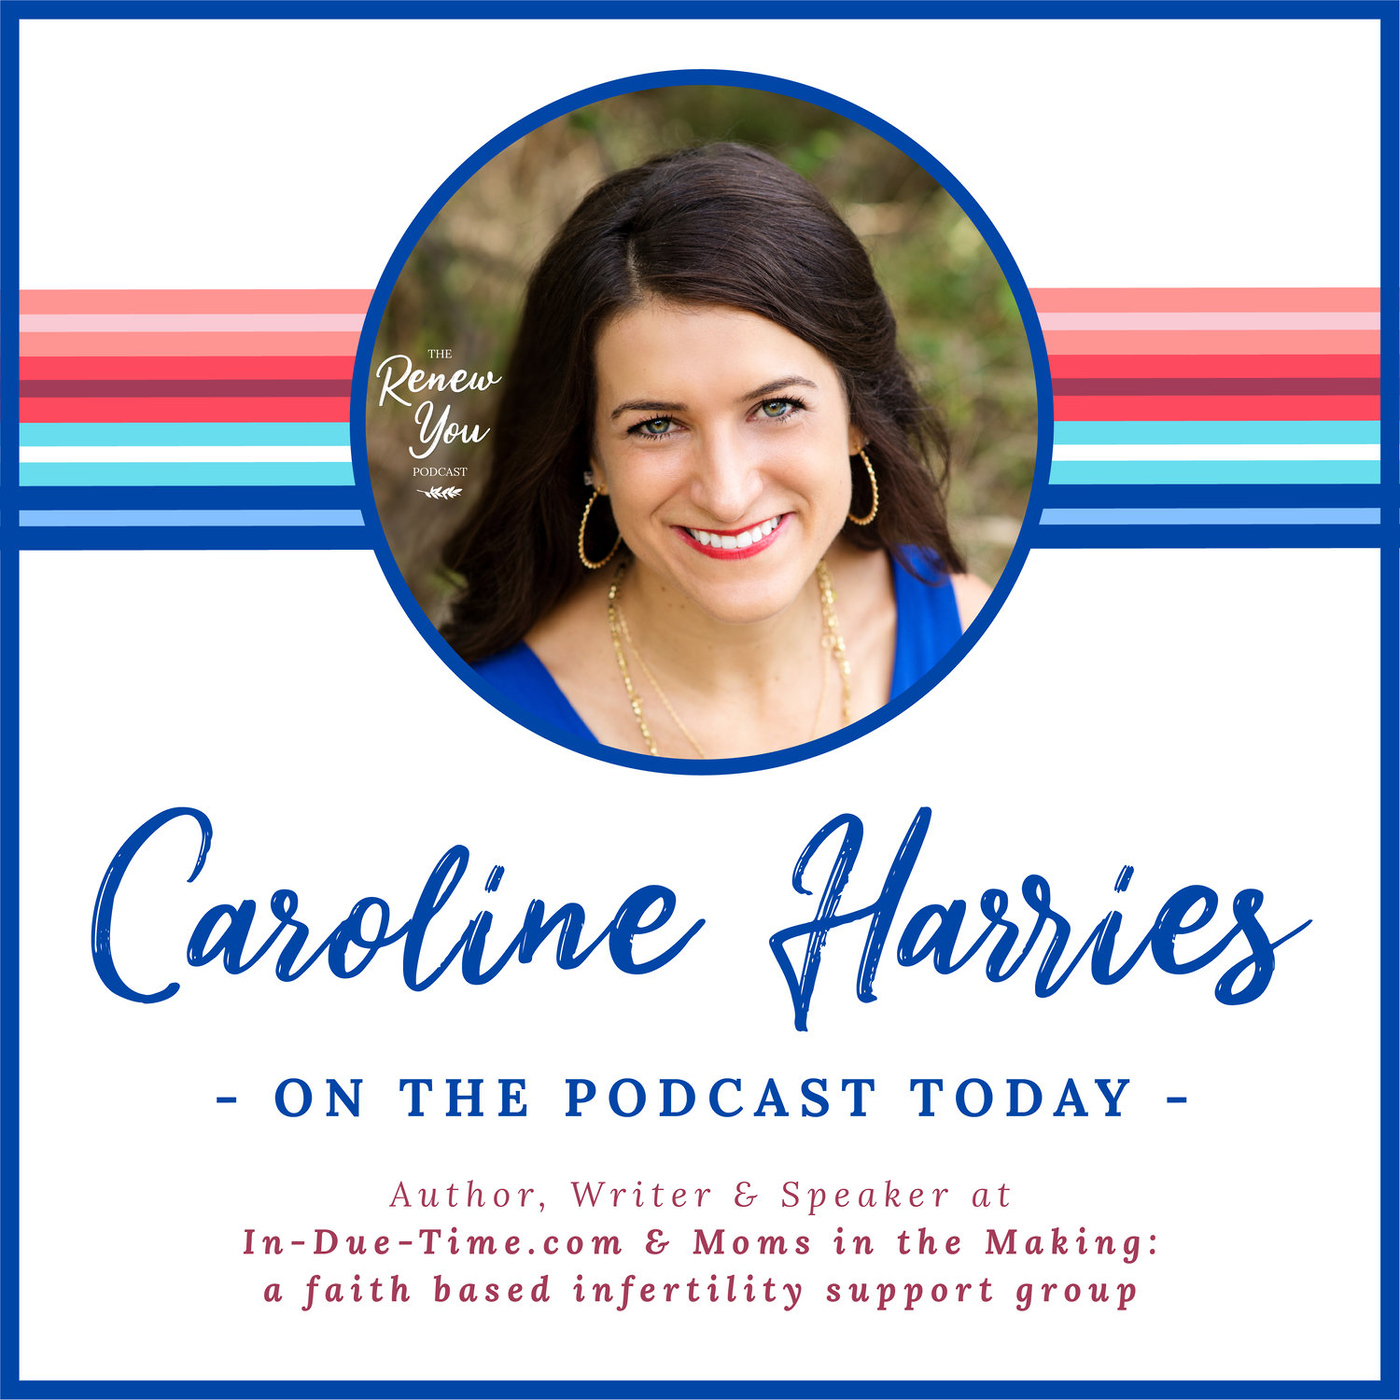 Episode 8: Renew Your Hope: An Interview with Caroline Harries on Finding Hope in the Waiting